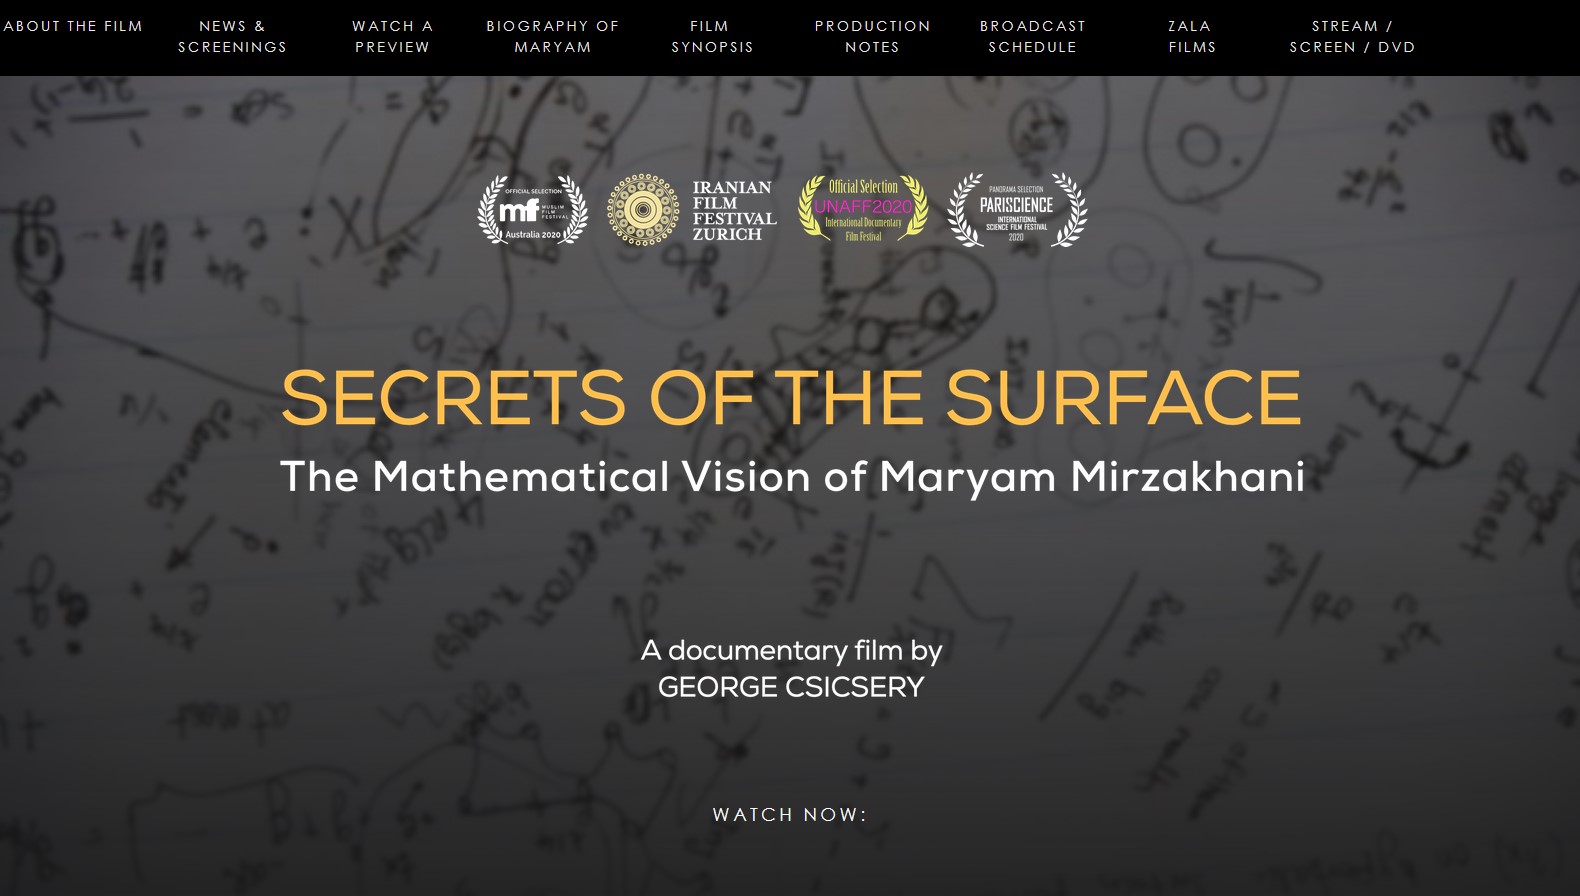 Secrets of the Surfaces Screening